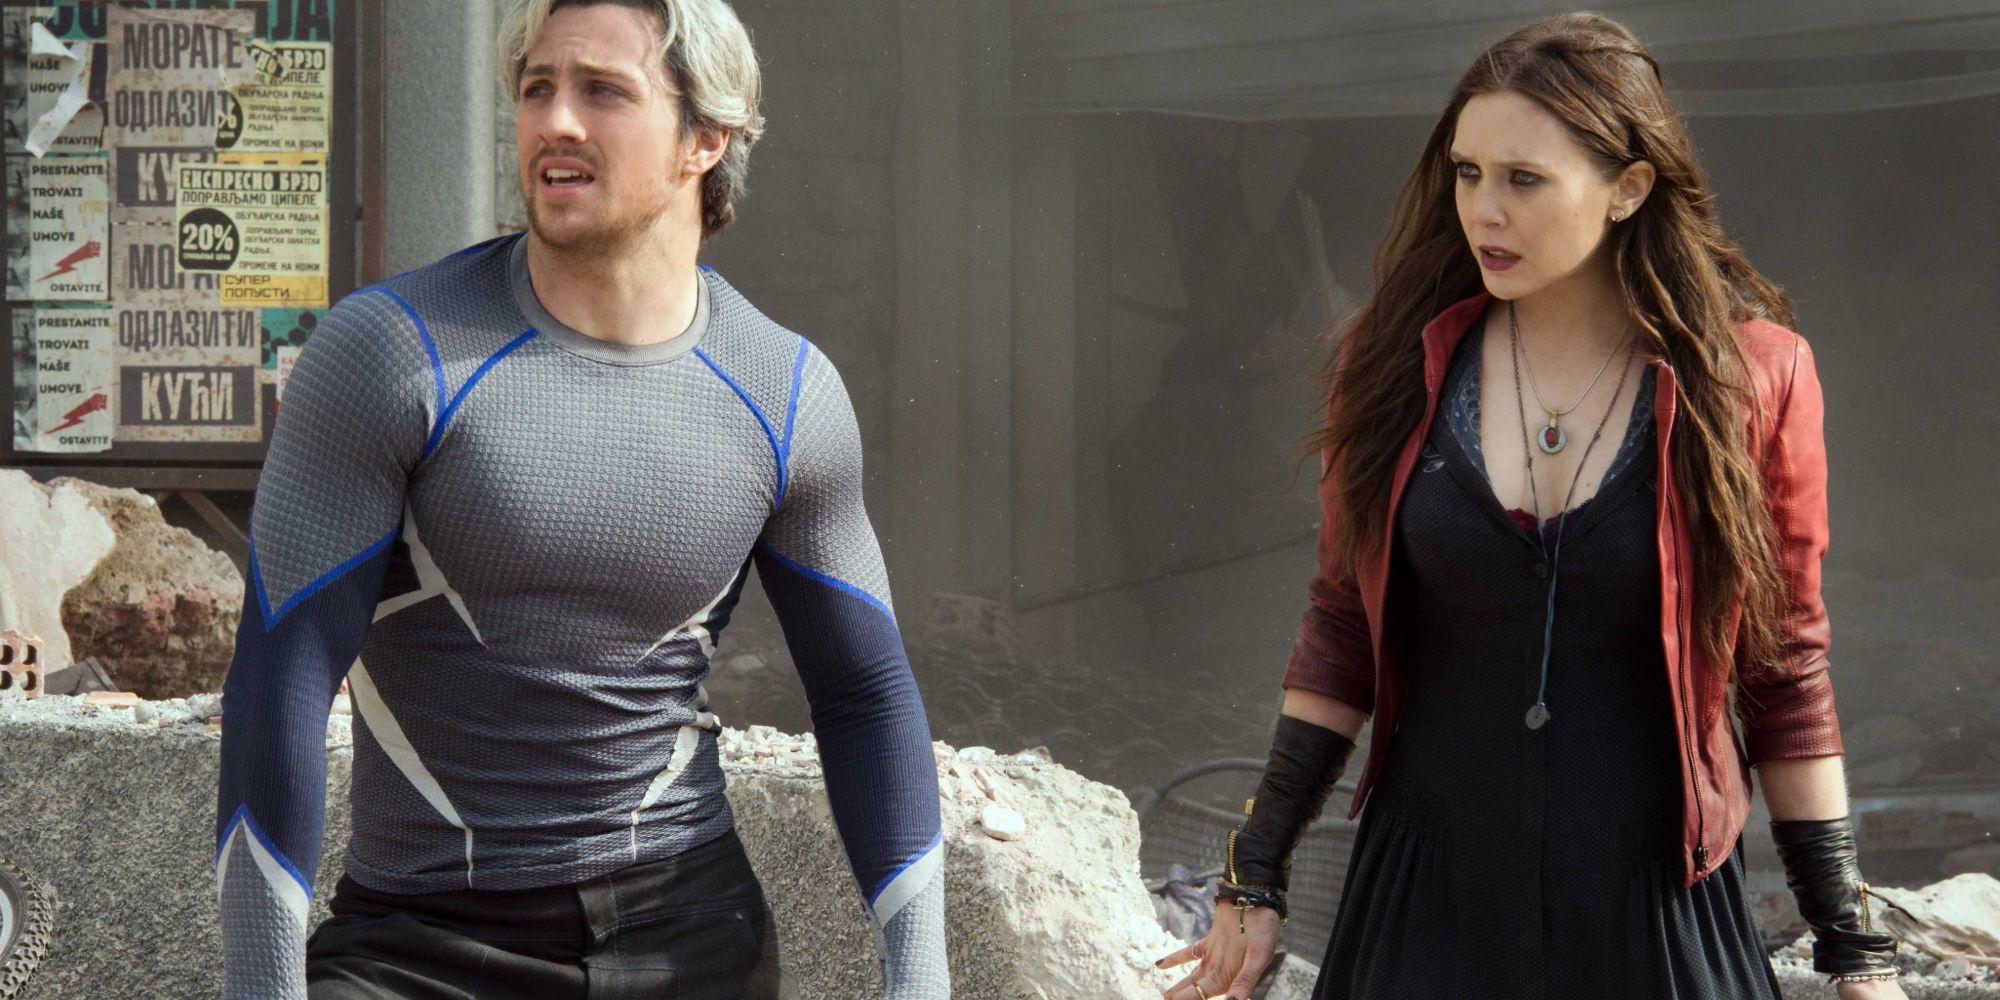 Elizabeth Olsen as Scarlet Witch and Aaron Taylor Johnson as Quicksilver in Avengers Age of Ultron